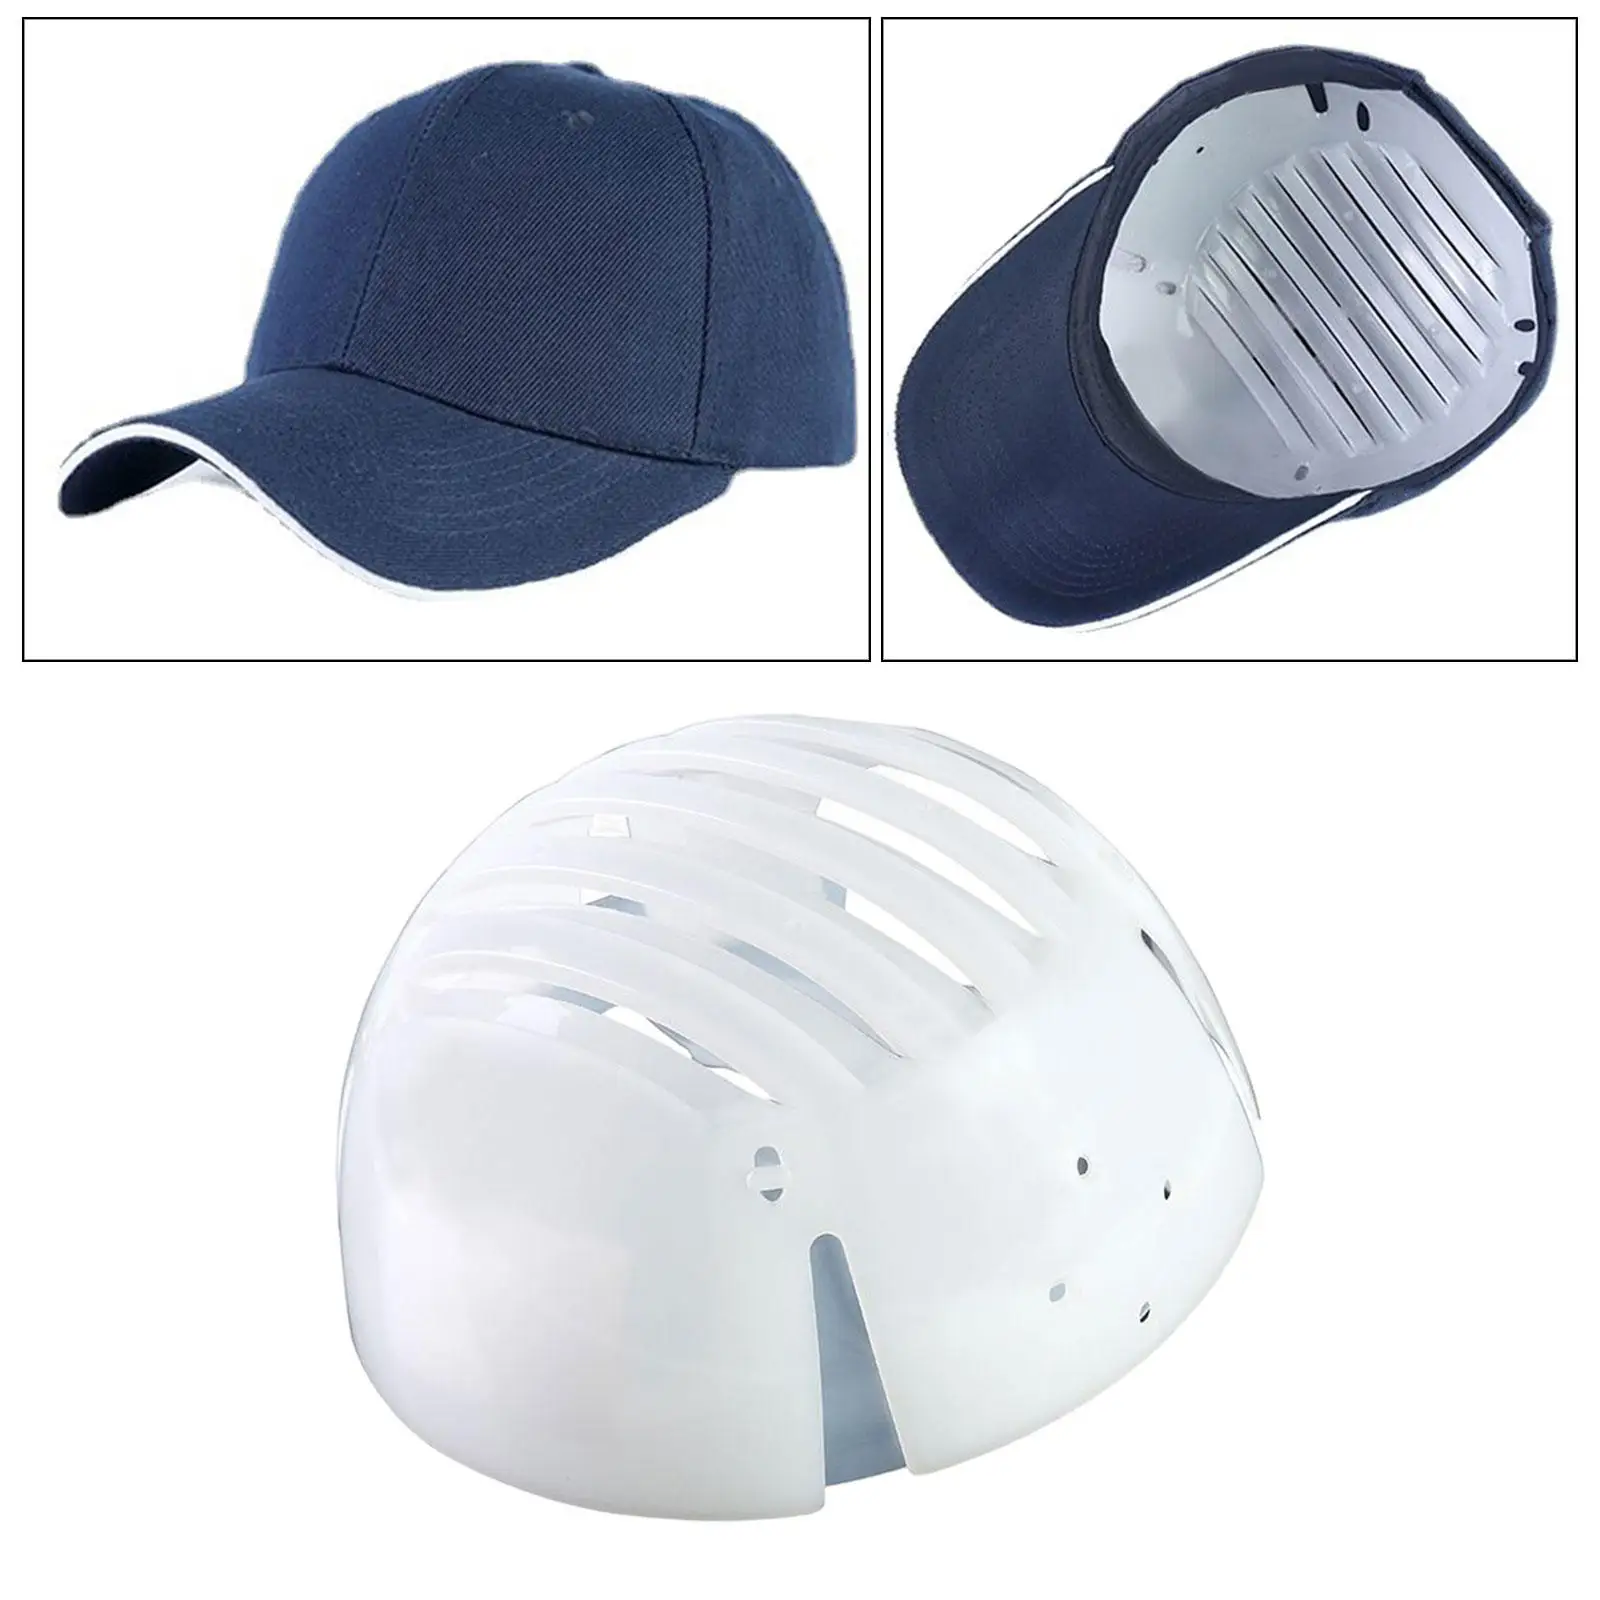 Safety Helmet Protective Hat Lining Comfort Protective Hat Liner Insert for Hat Sports